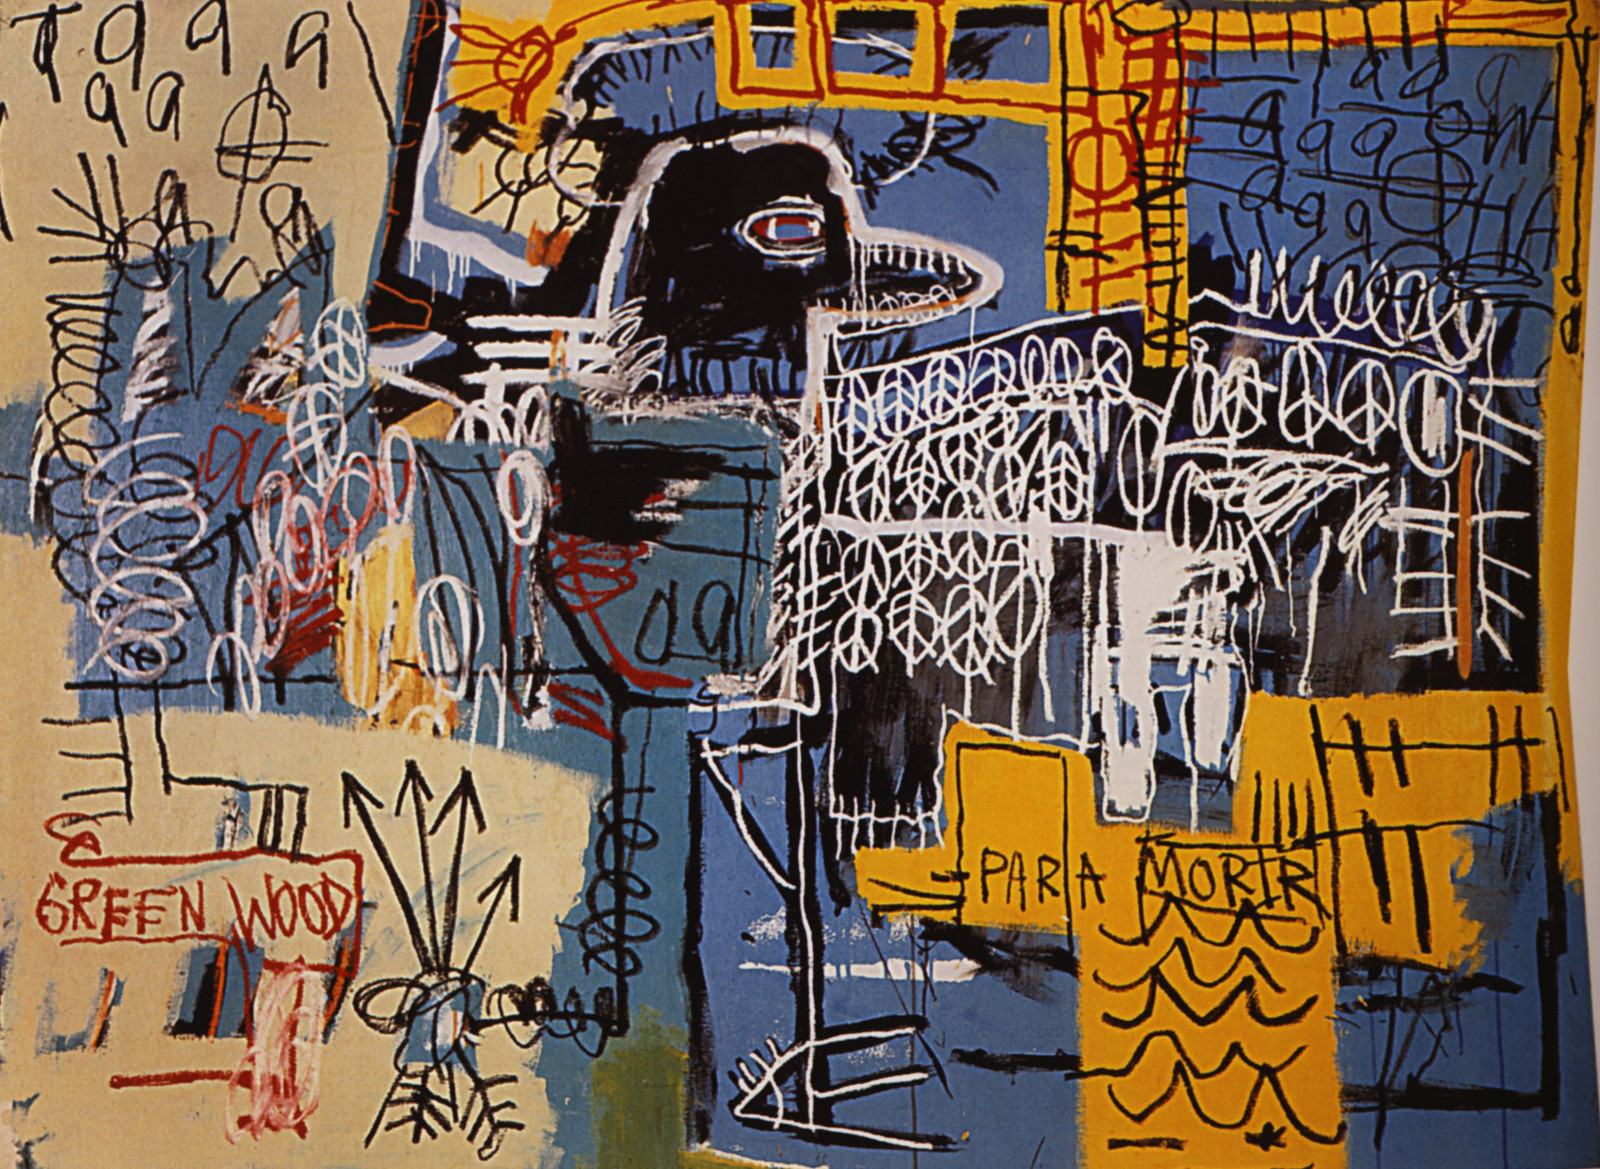 Jean-Michel Basquiat. Bird on Money. 1981. Acrylic and crayon on canvas. 167.5 x 228.5 cm. Private collection